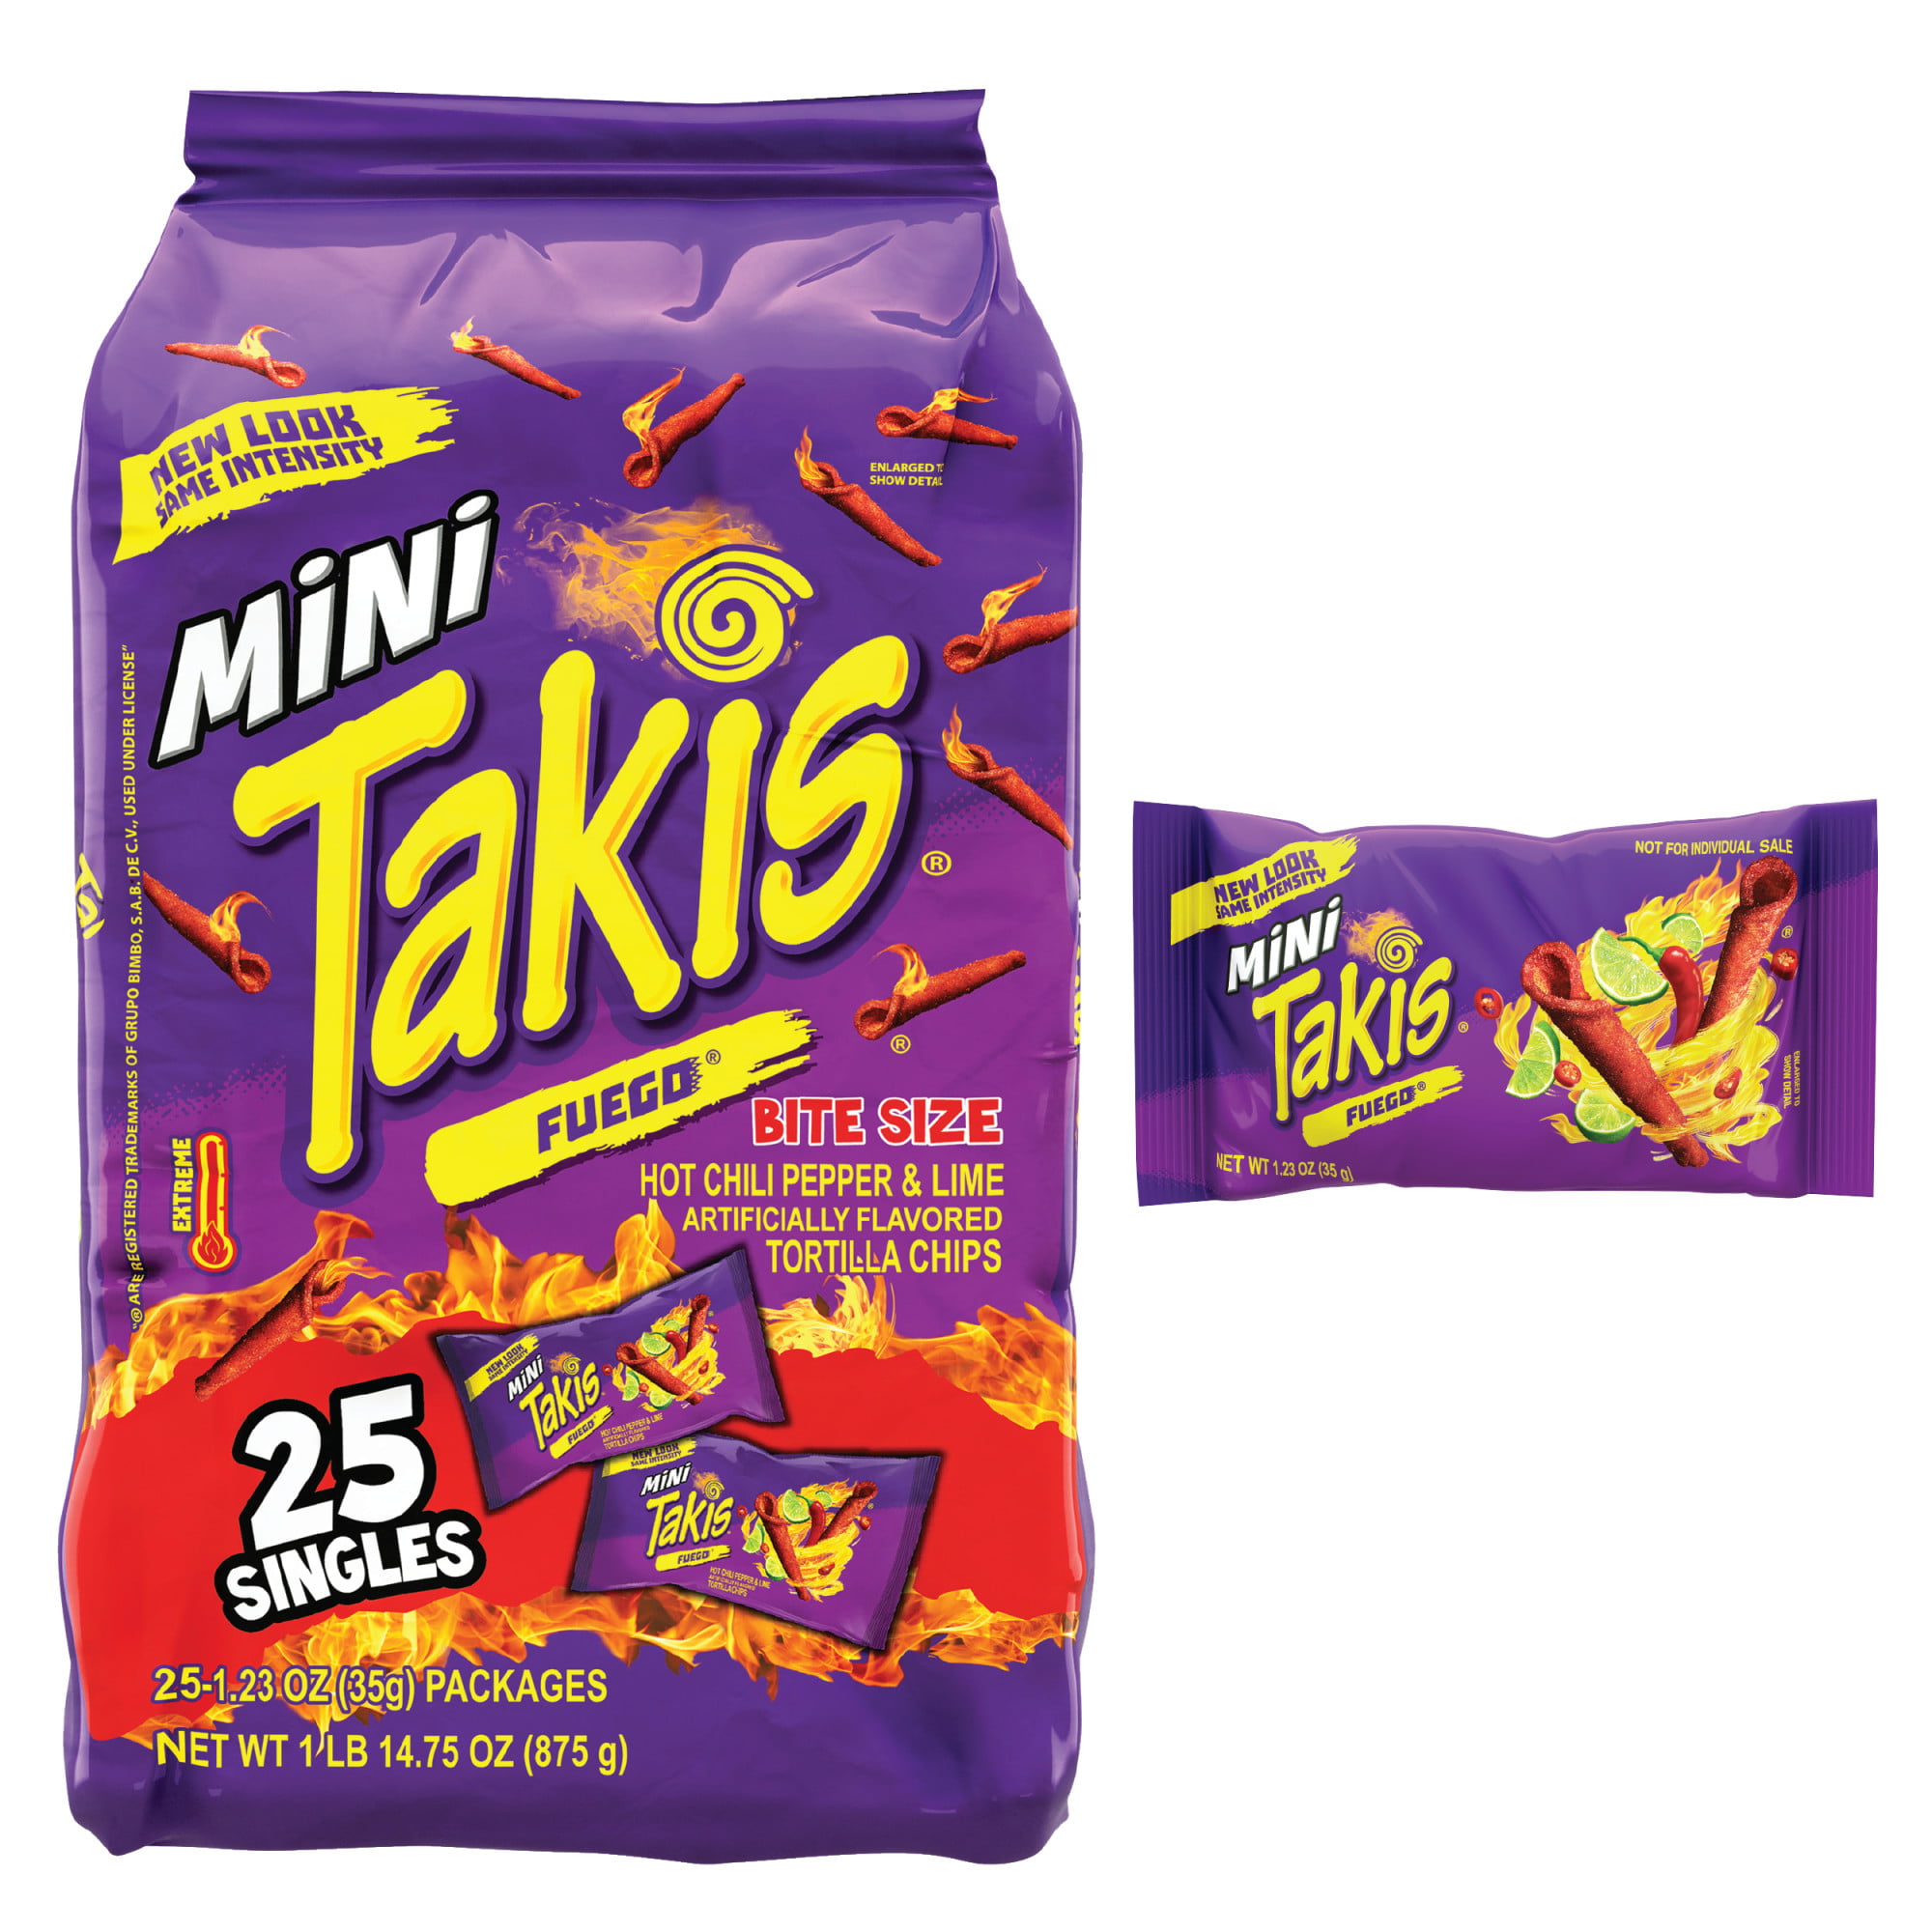 Takis Fuego Mini Rolls 25 ct Multipack,  Hot Chili Pepper & Lime Flavored Spicy Tortilla Chips